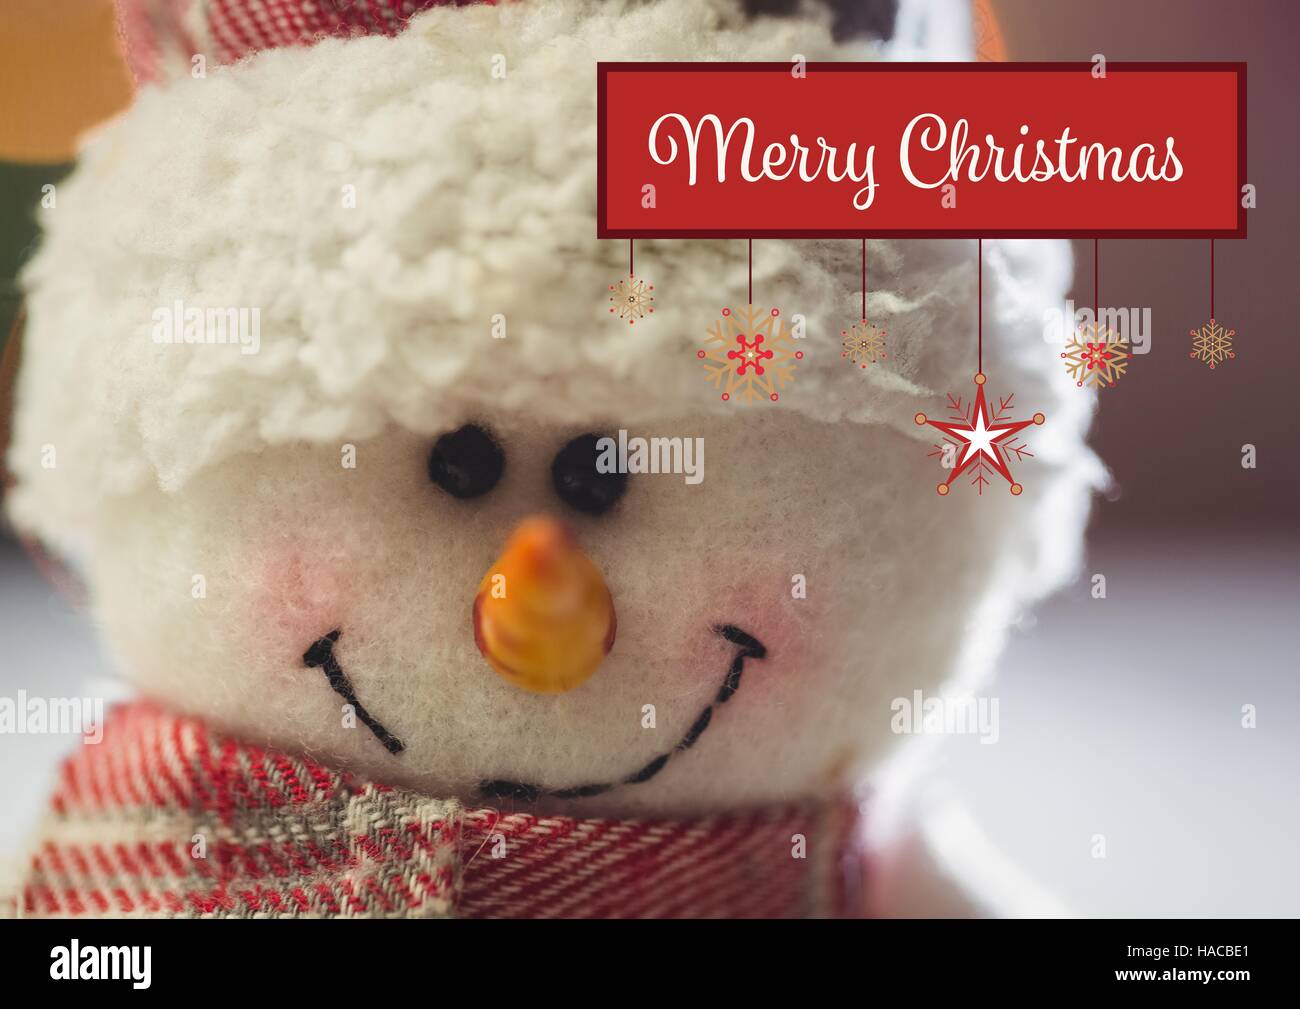 Merry christmas message against snowman Stock Photo